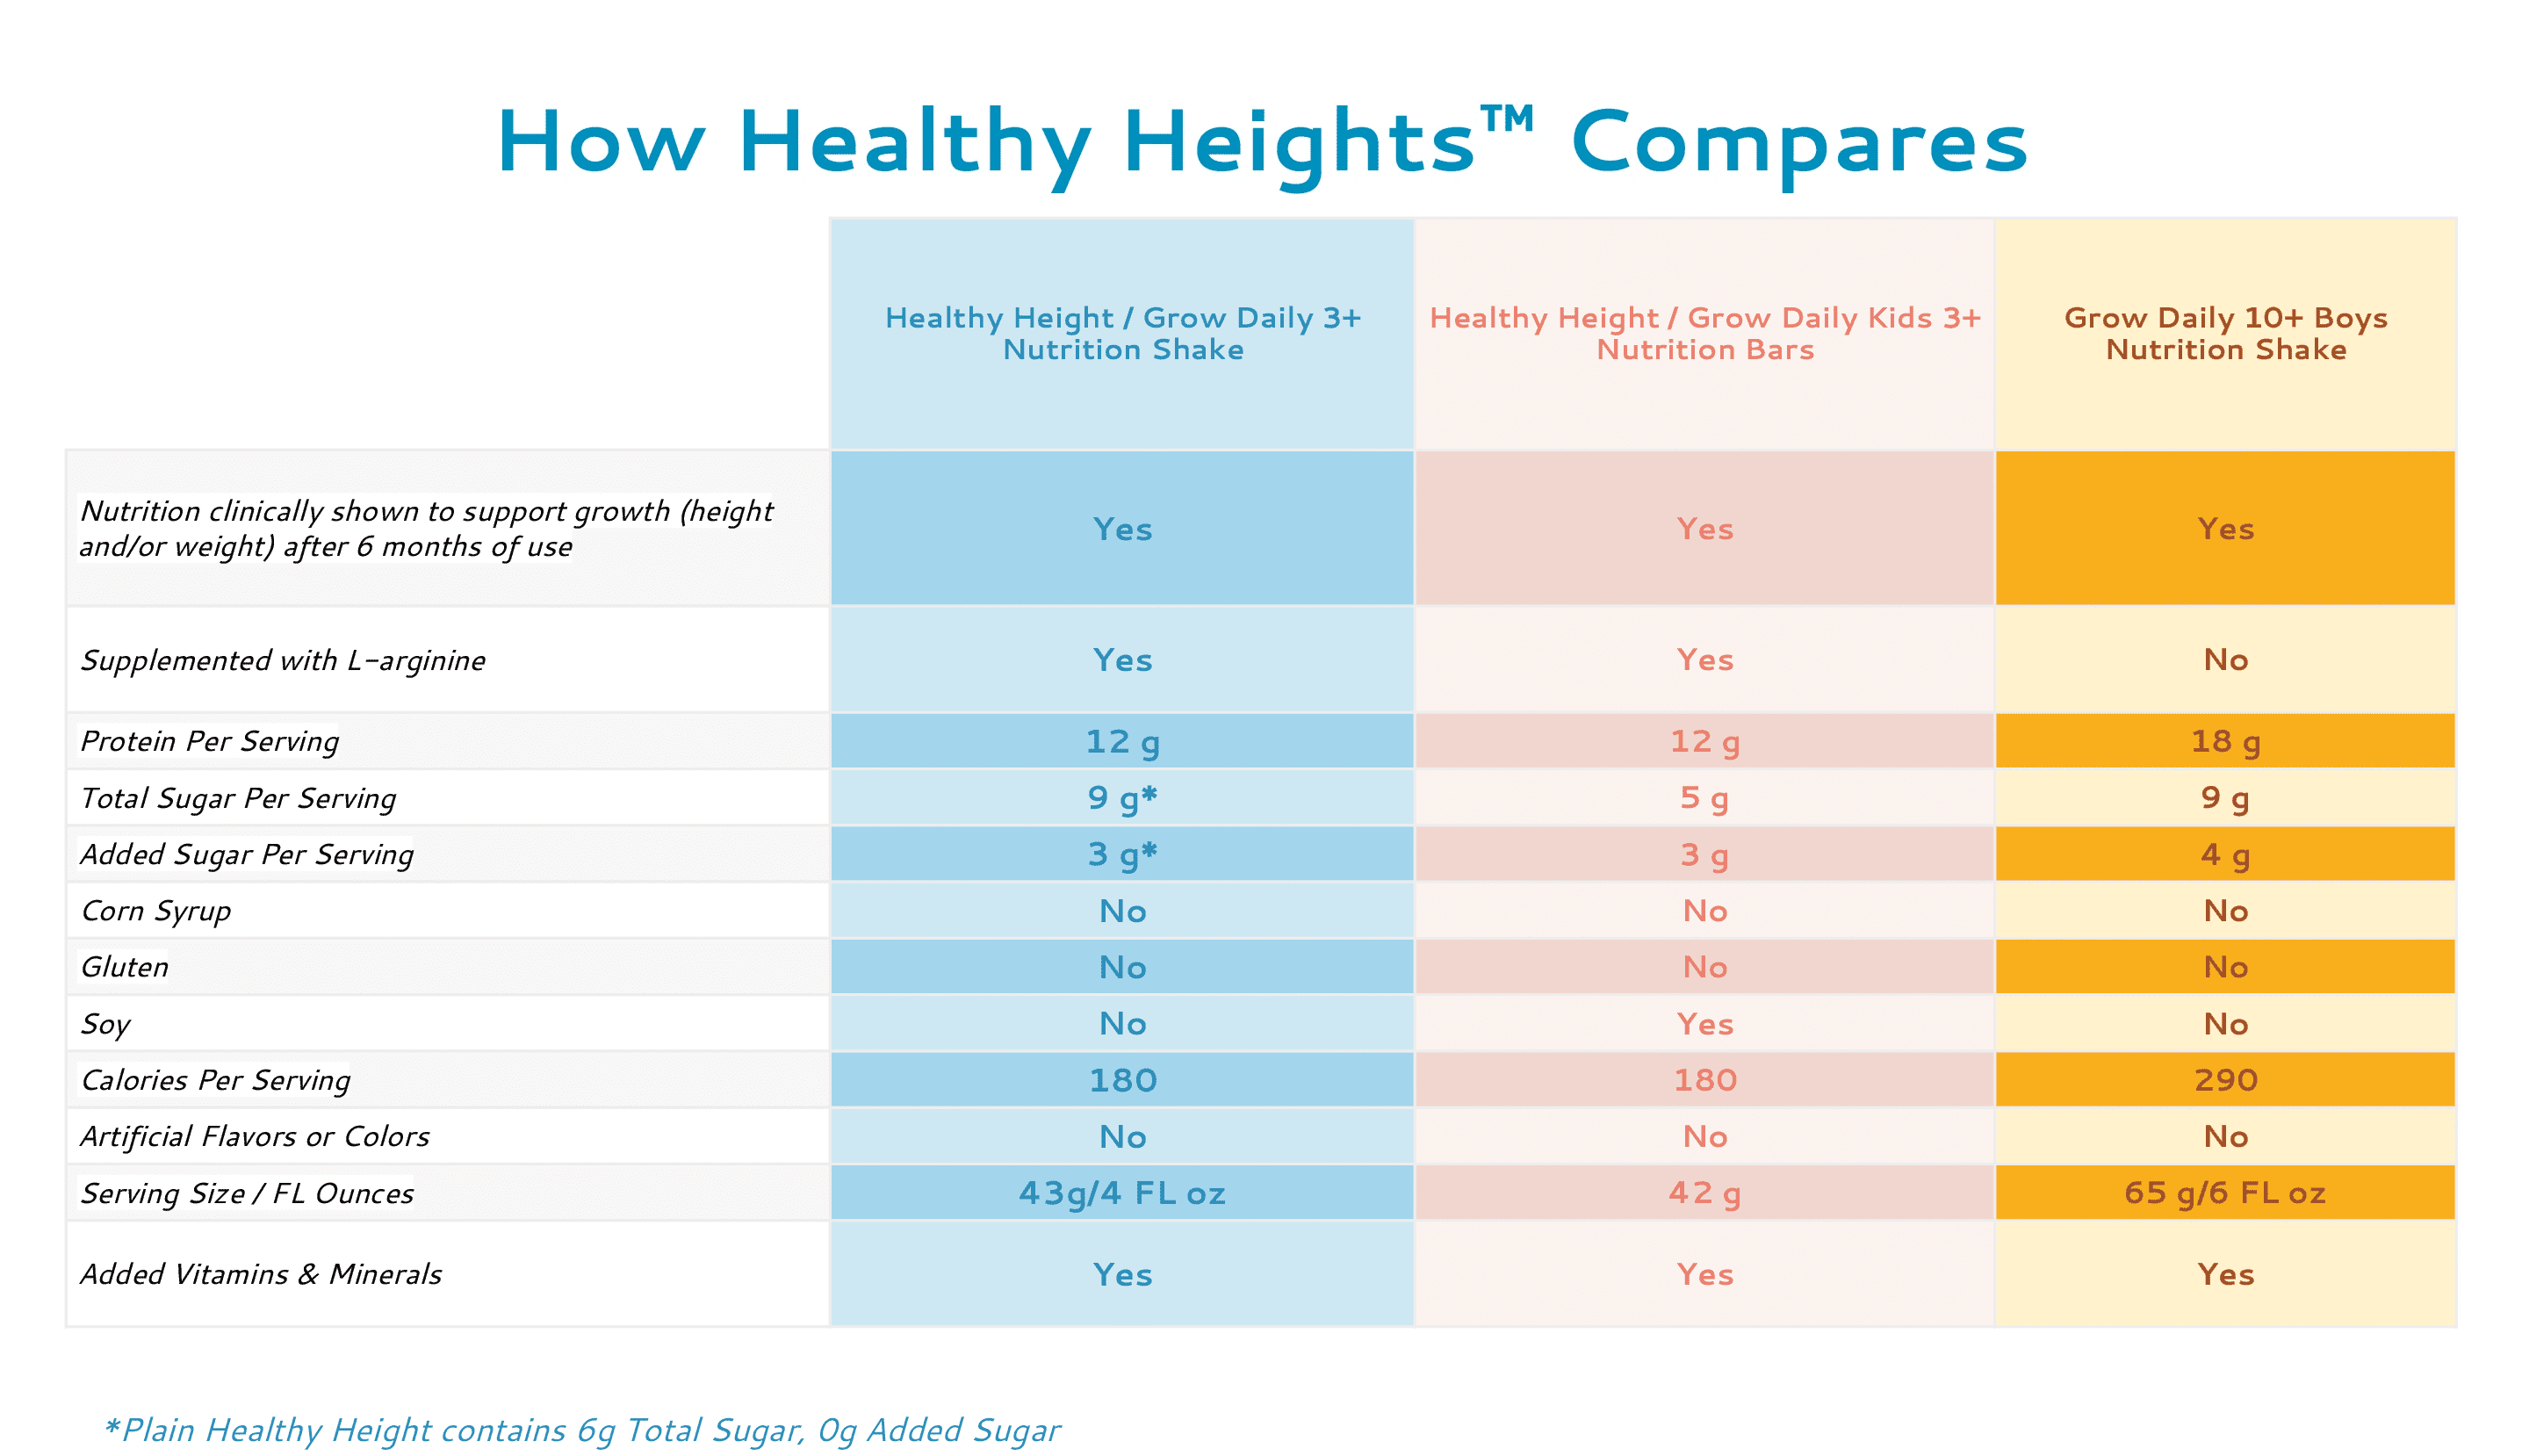 How Healthy Heights Compares